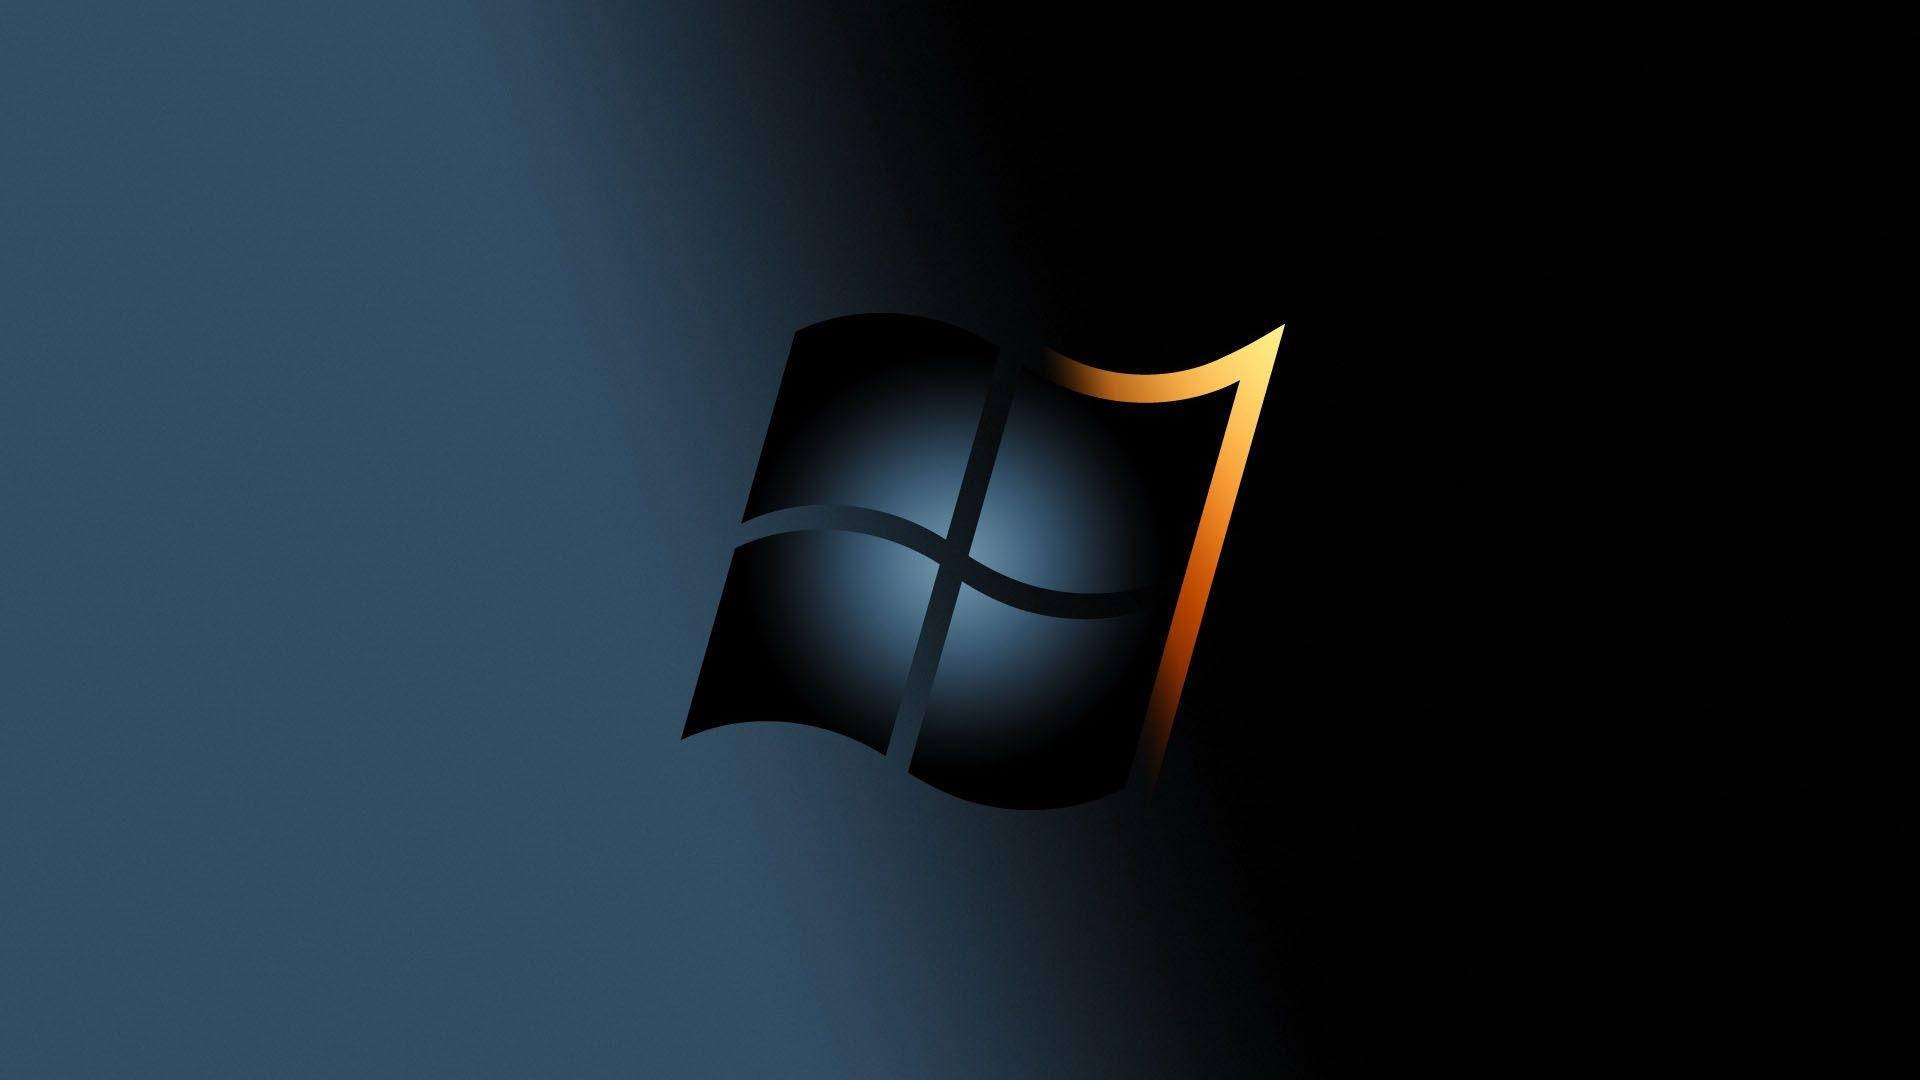 Image For > Windows 7 Ultimate Wallpapers 1920x1080